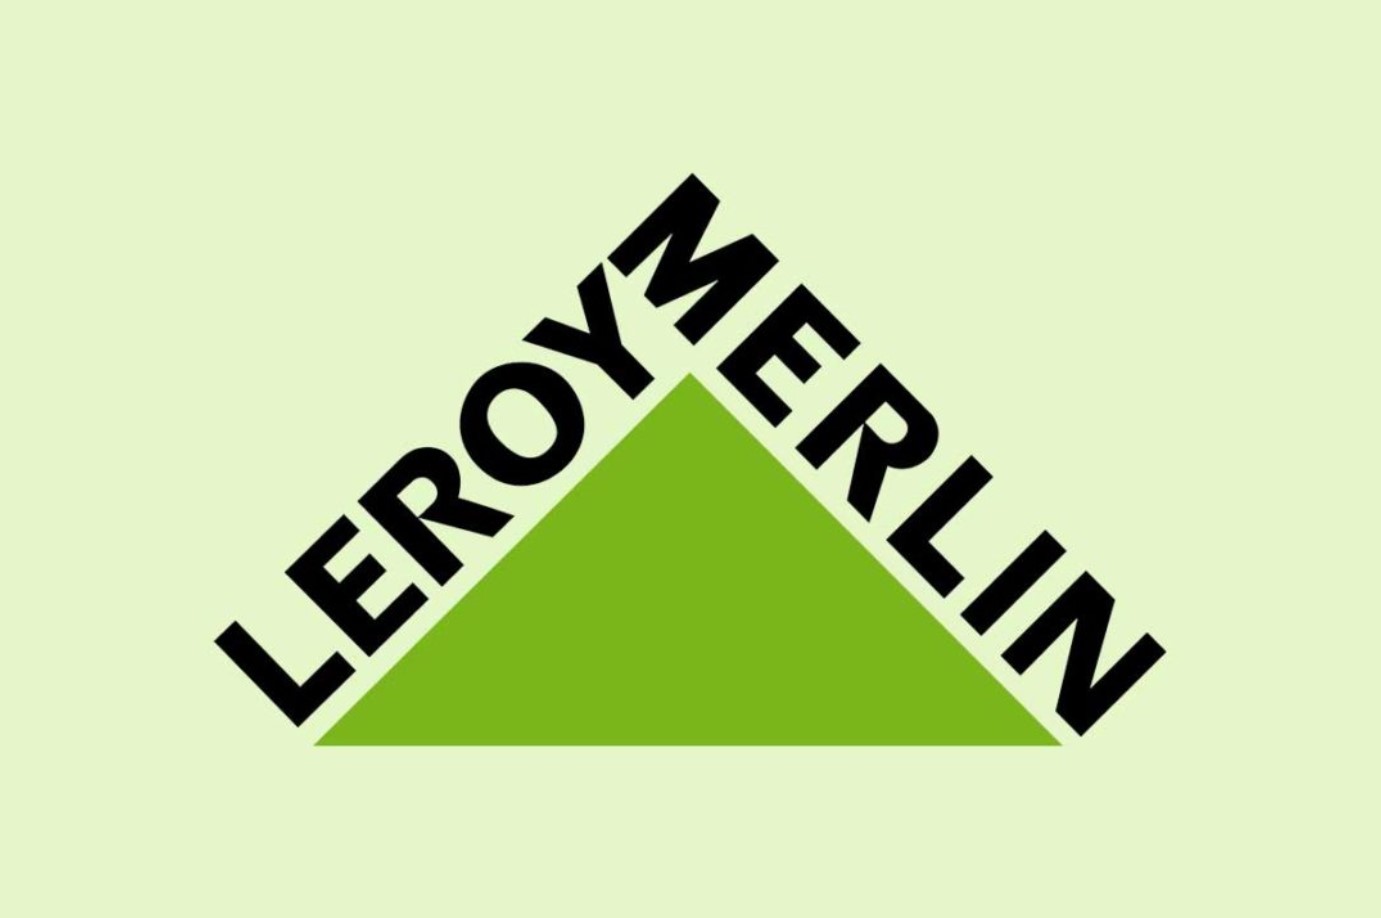 Leroy Merlin Customer Service: Telephone, Contact And Support Email